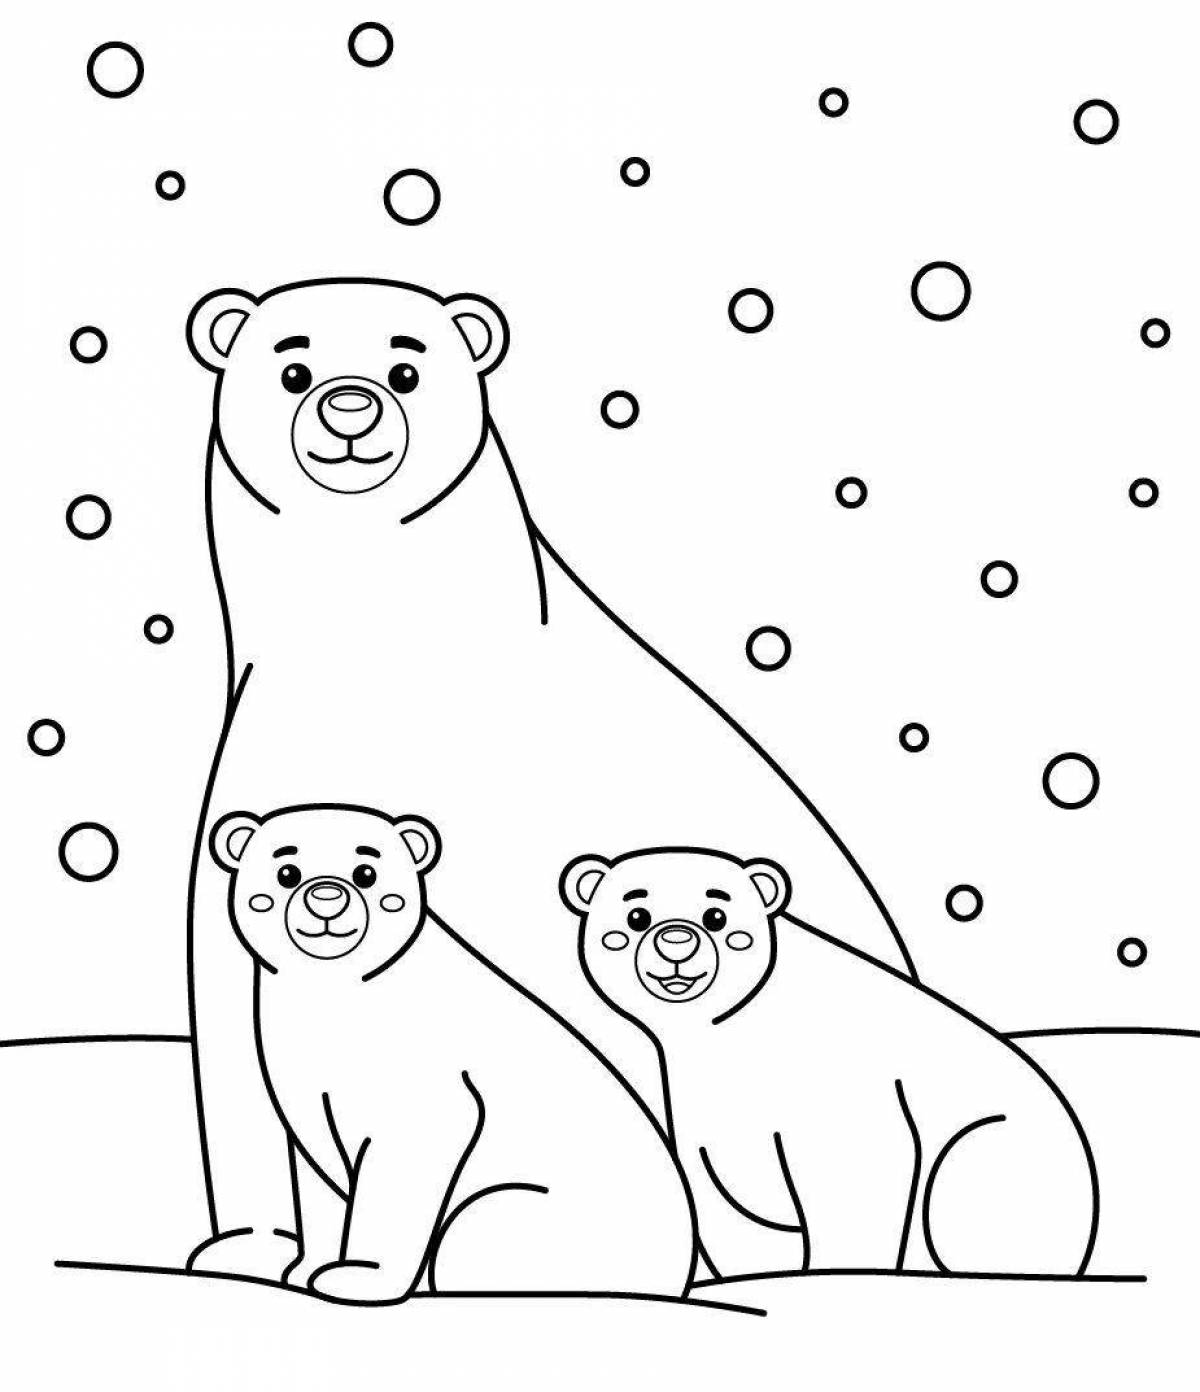 Shiny polar bear coloring book for 6-7 year olds